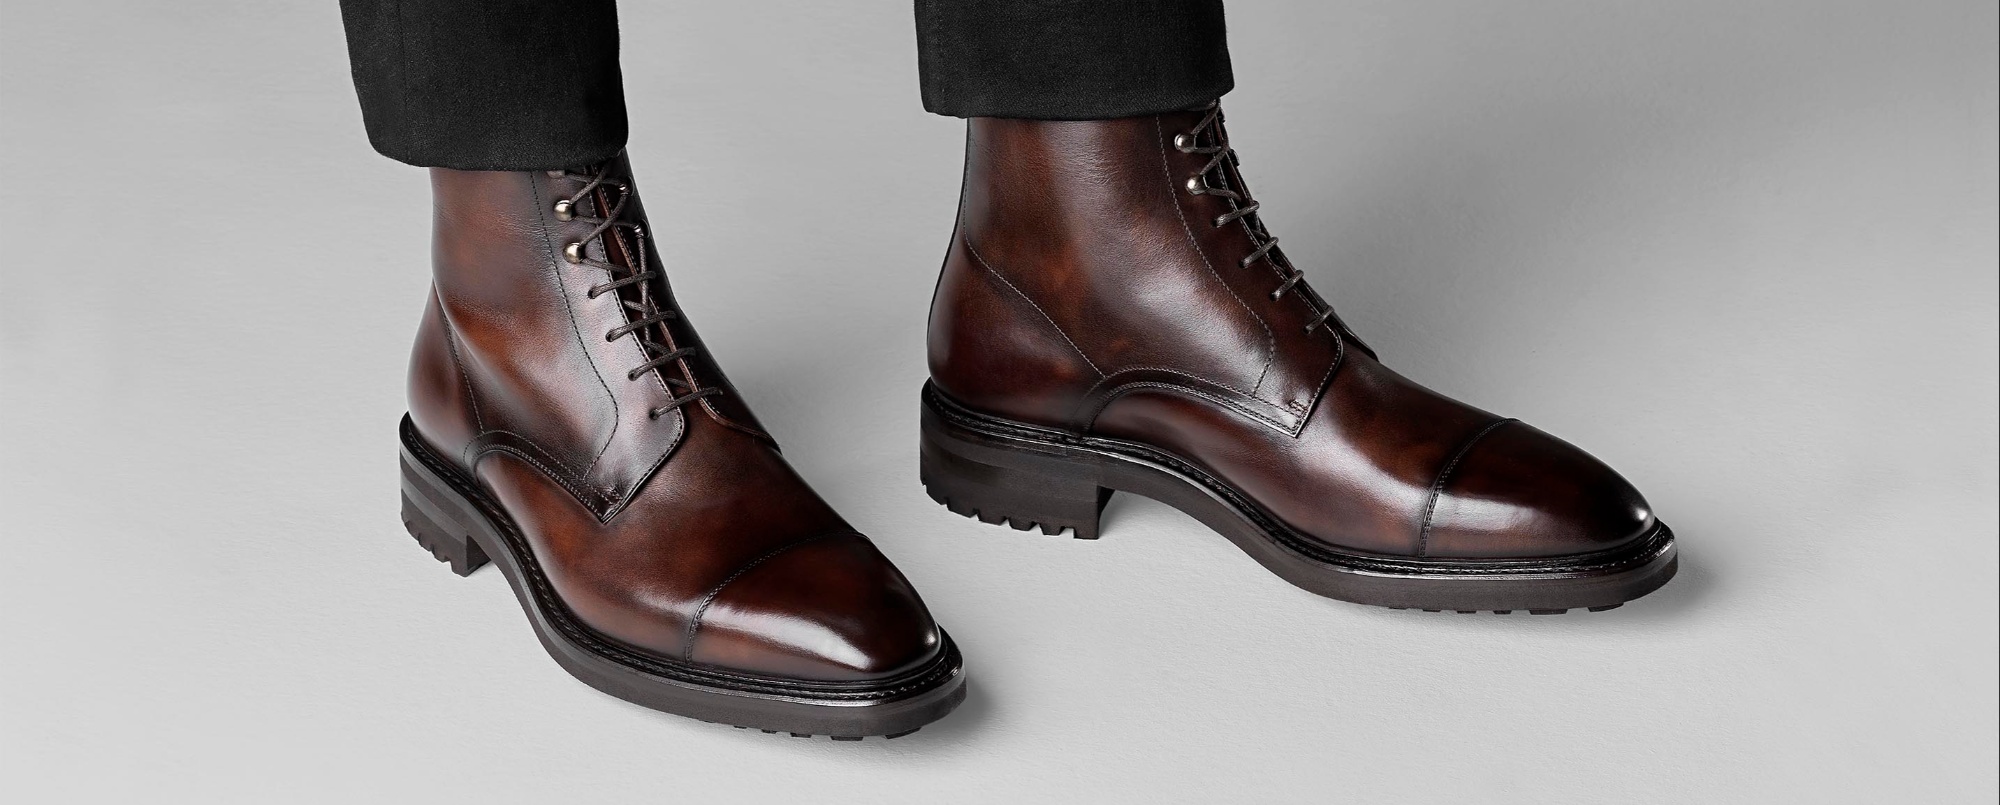 Lace-Up Boots for Men